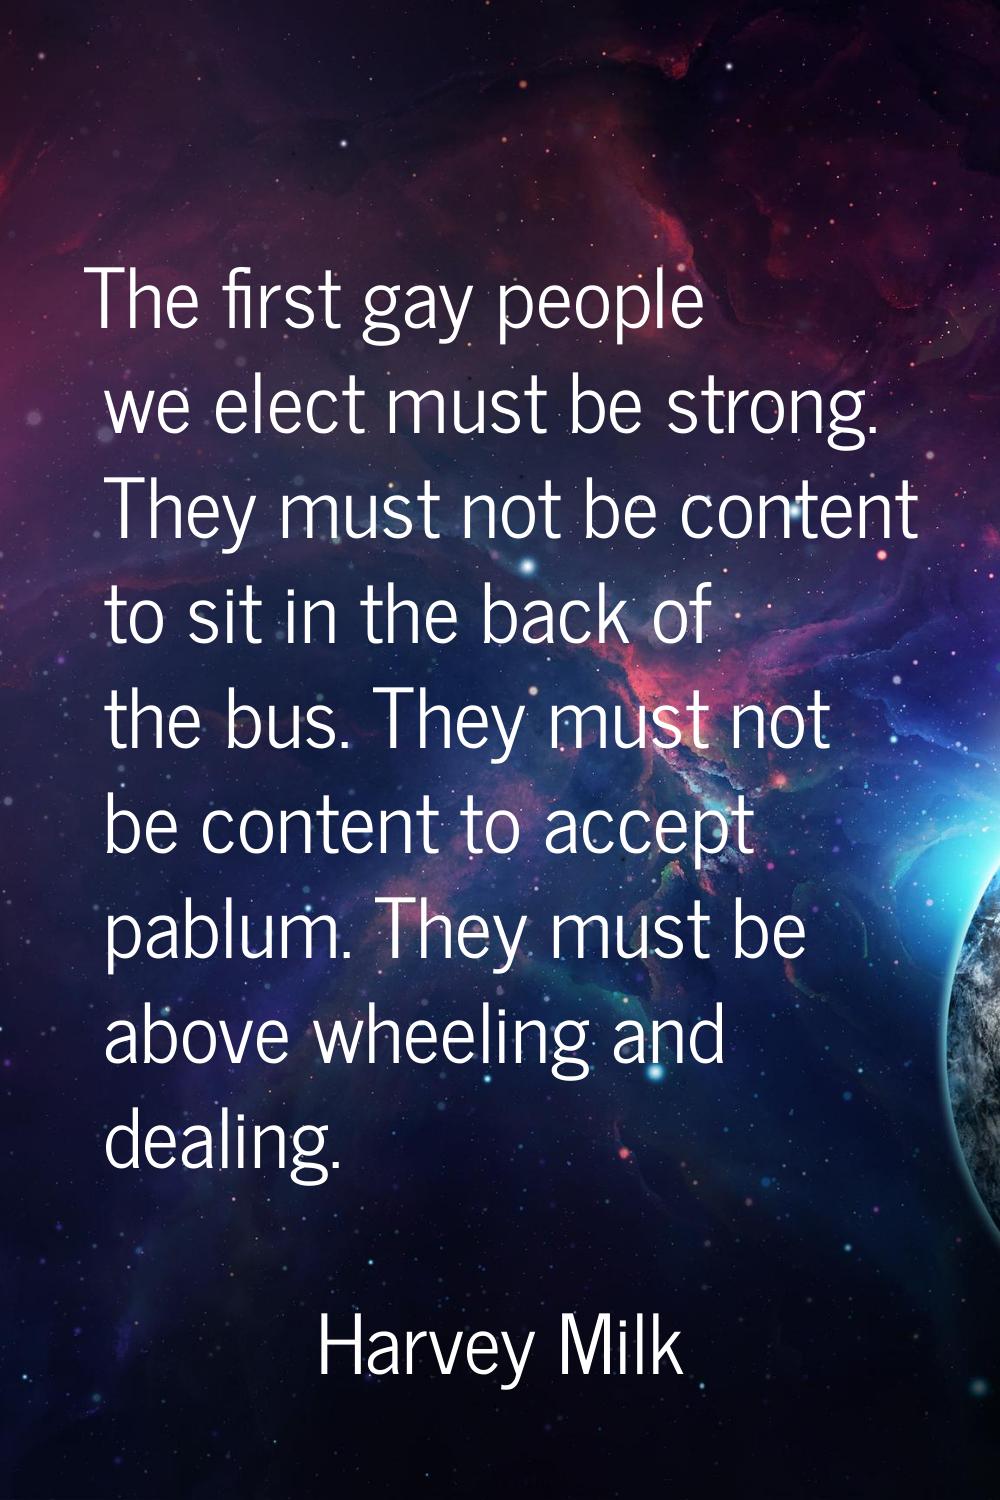 The first gay people we elect must be strong. They must not be content to sit in the back of the bu